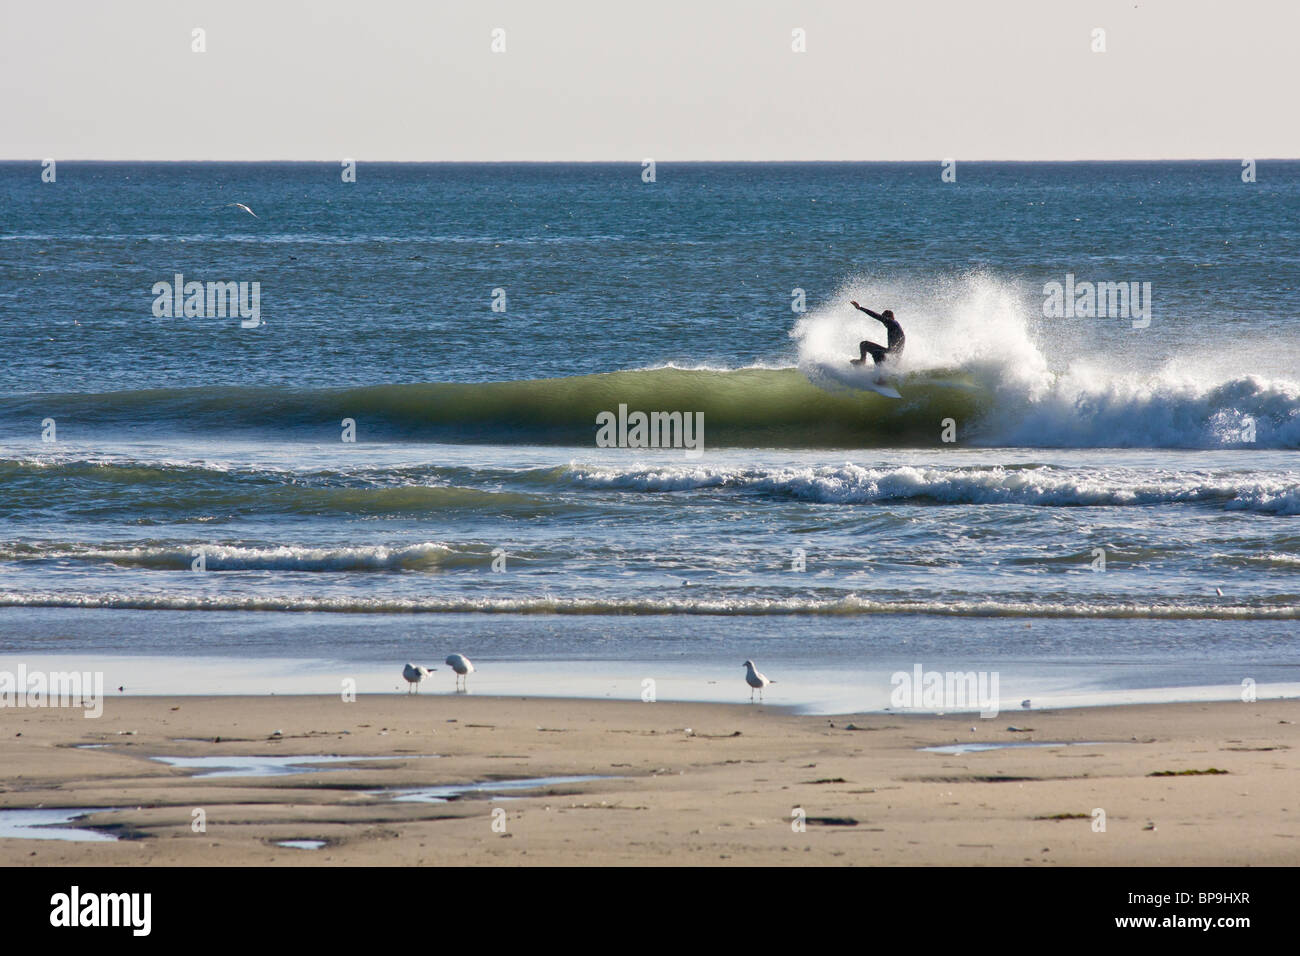 Single Surfer surfing single wave close to the beach in Los Angeles, California. Stock Photo